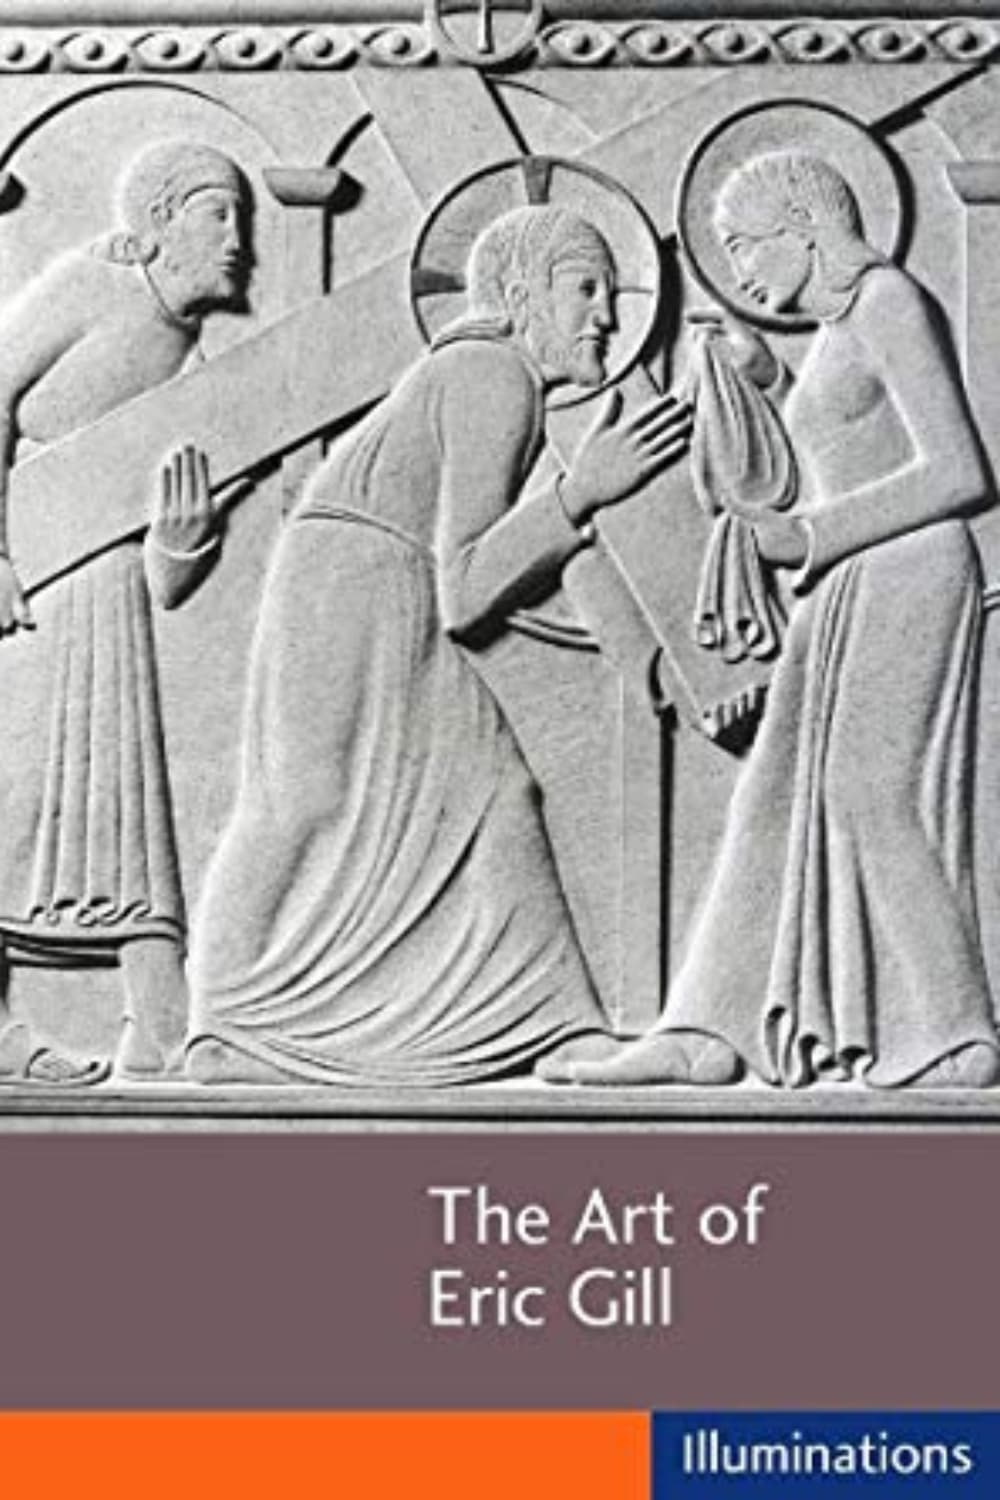 The Art of Eric Gill